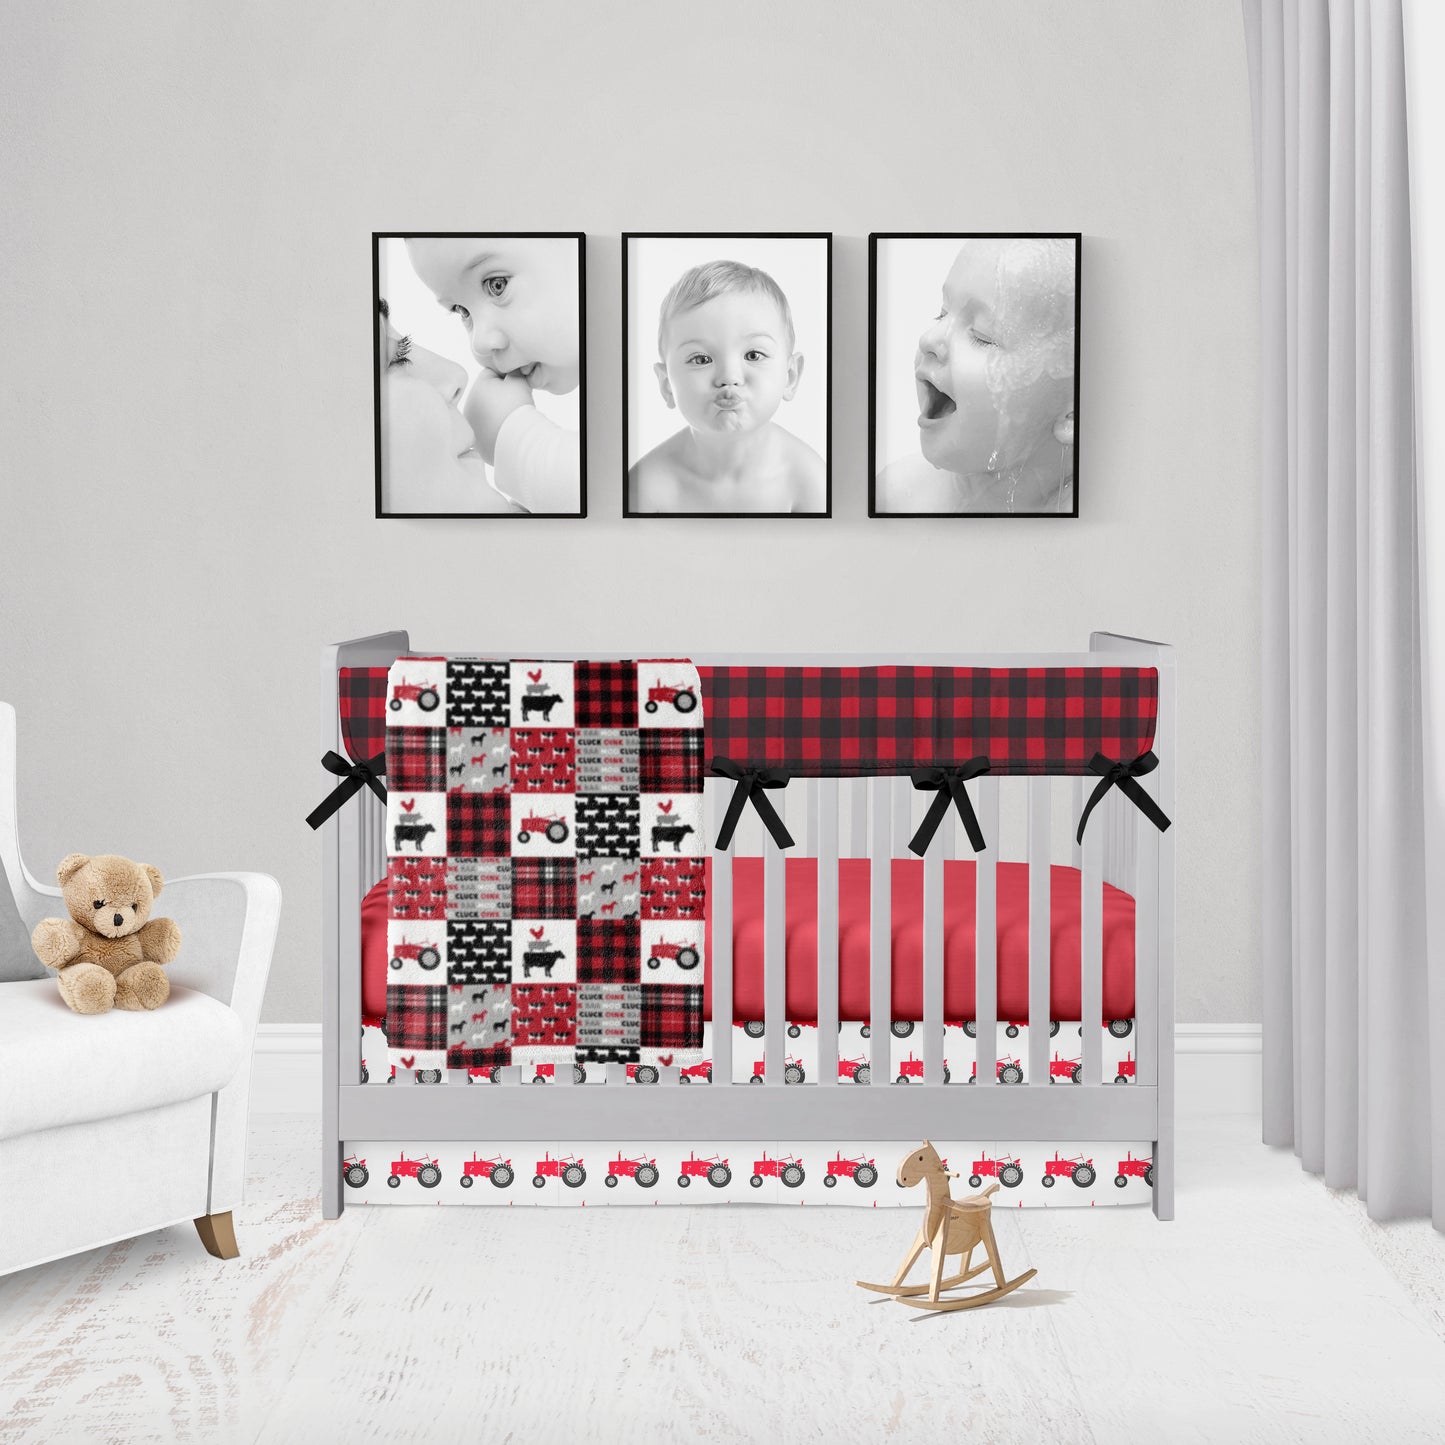 red tractor bedding, red and black plaid rail cover, red sheet, red tractors on a white background crib skirt and a red tractor/farm faux minky quilt